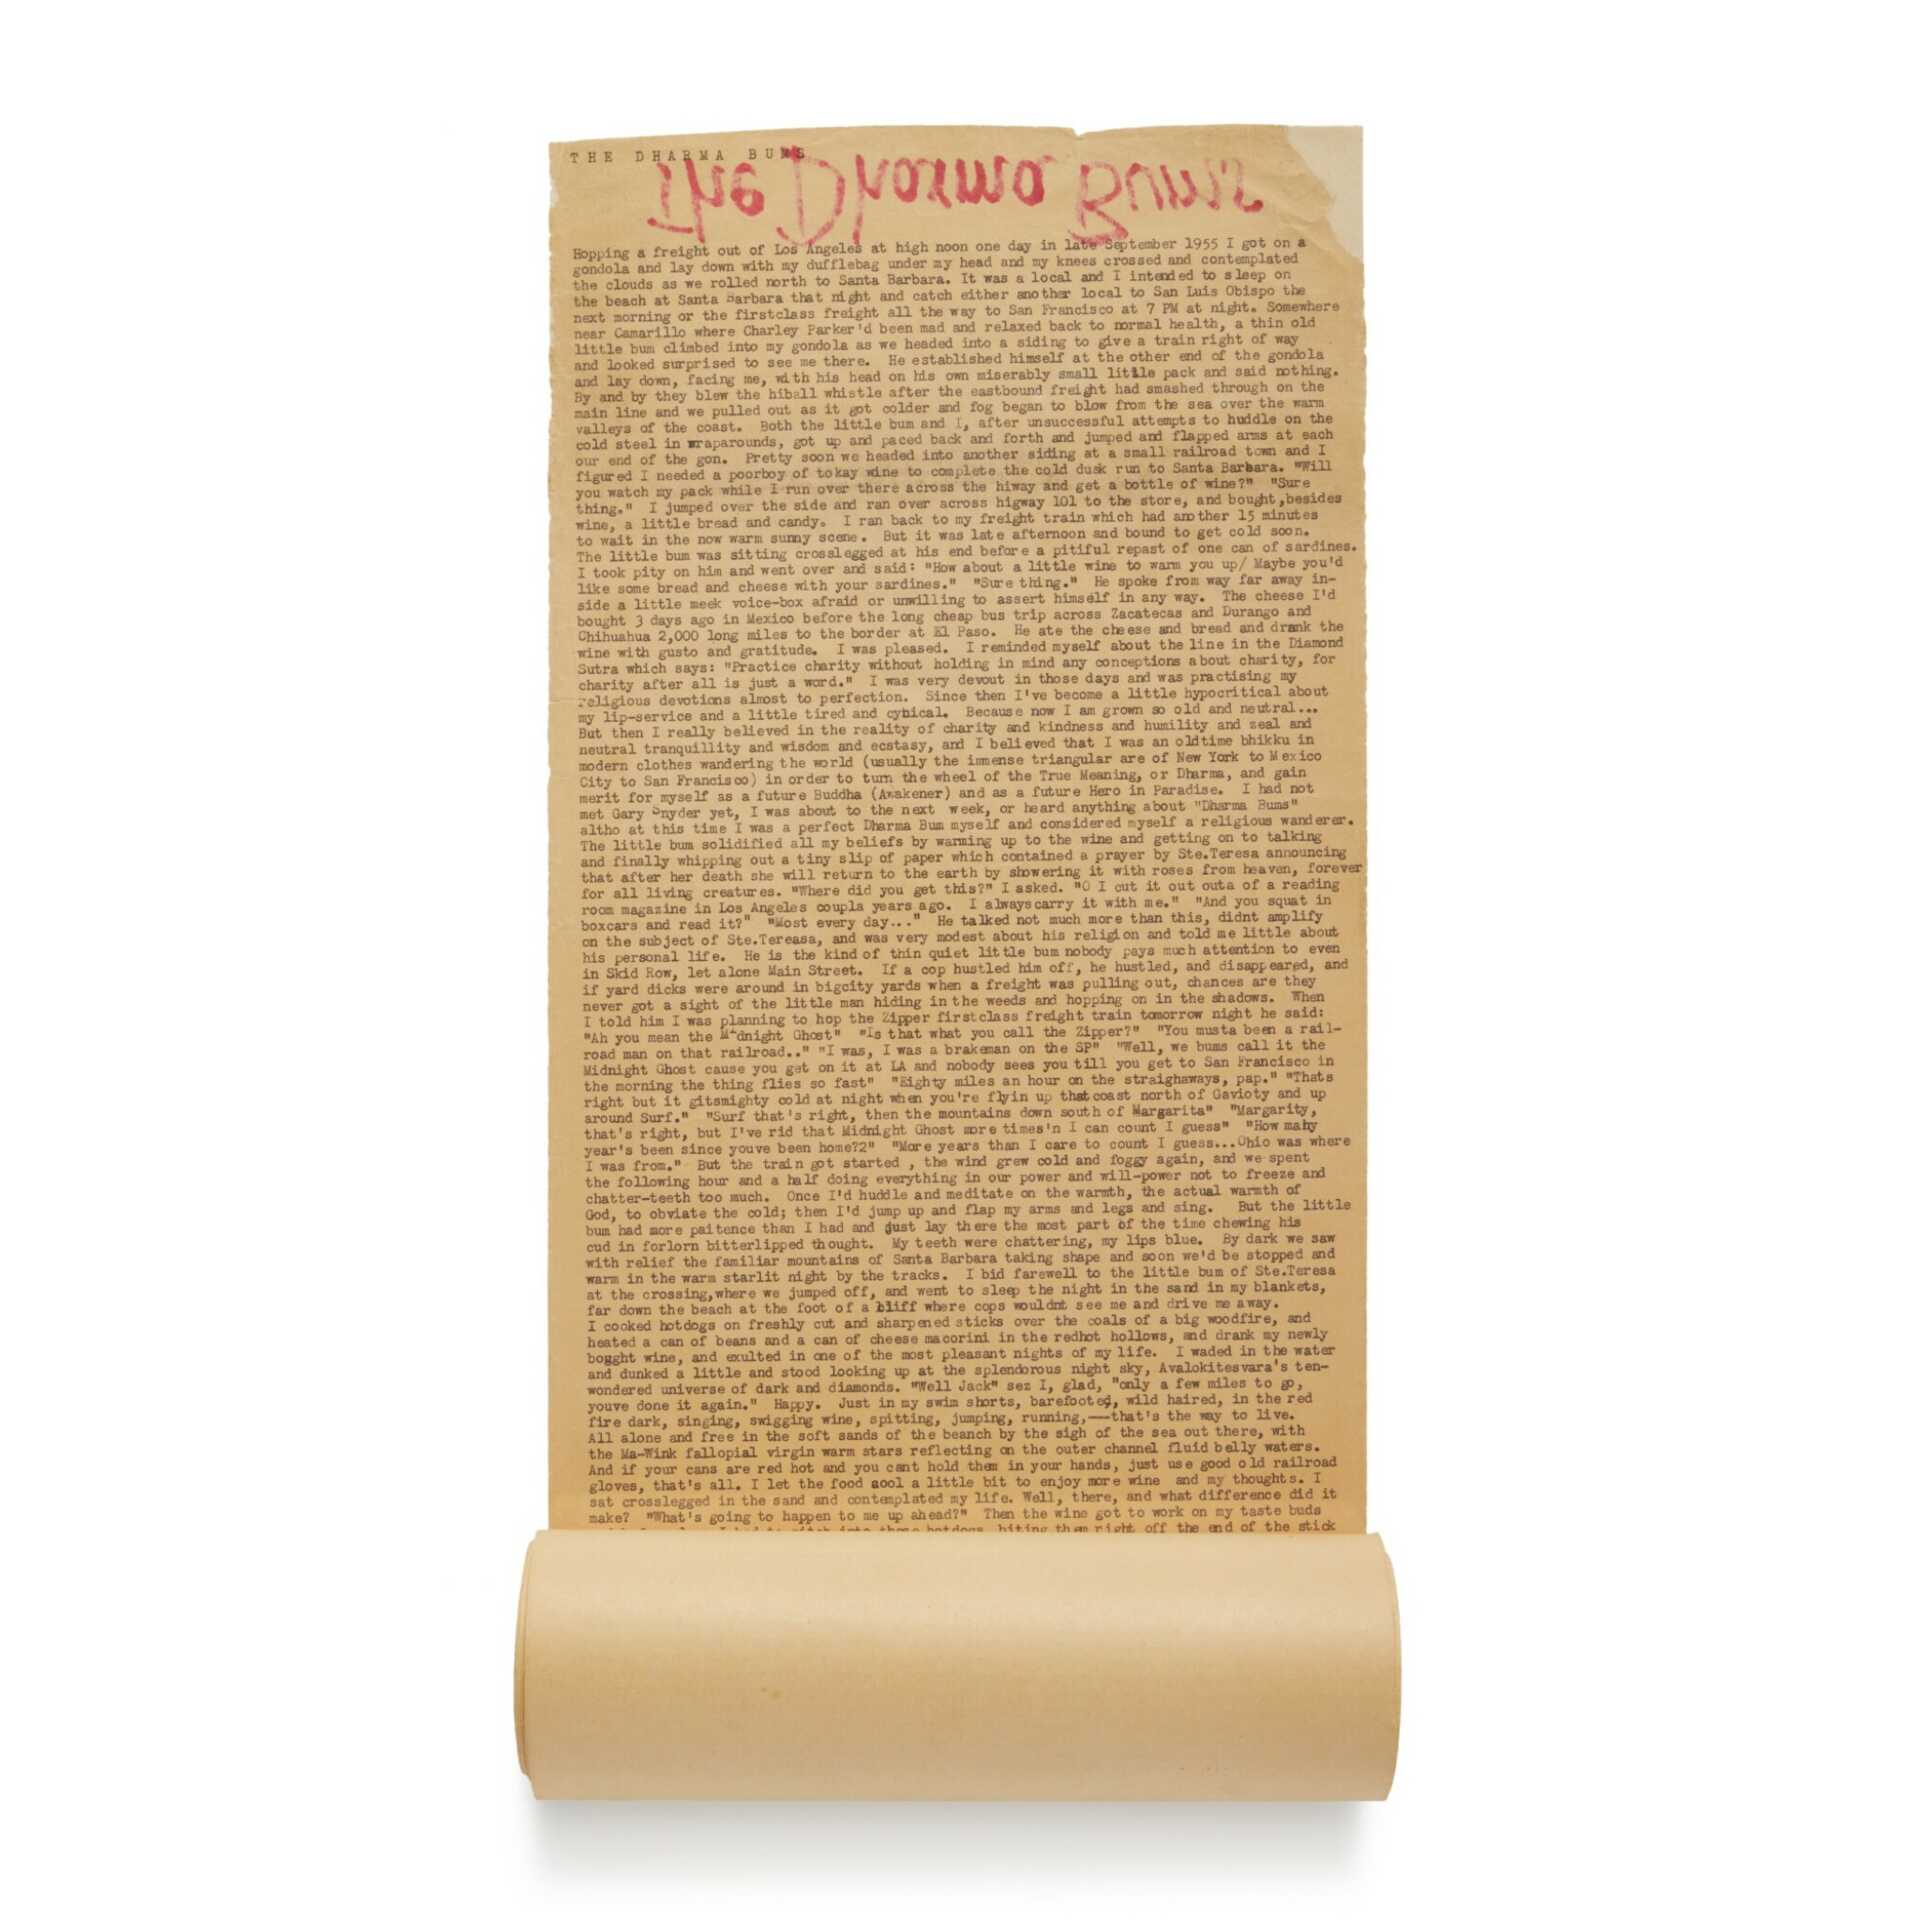 Kerouac, Jack | Typescript scroll of The Dharma Bums. Typed by Kerouac in Orlando, Florida, 1957, published by Viking in 1958